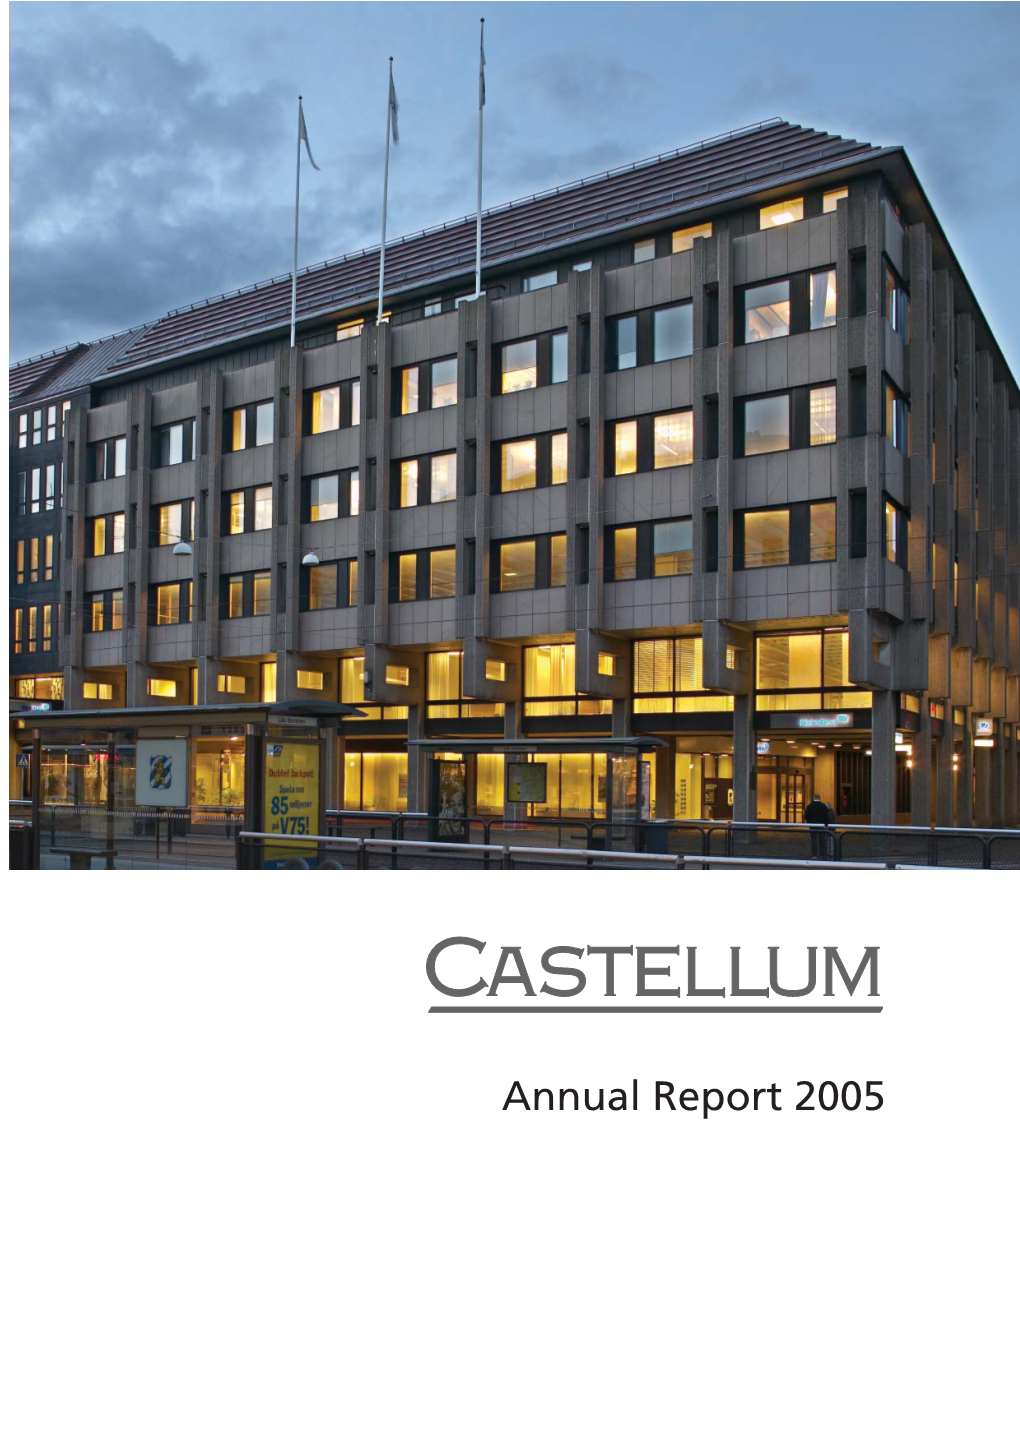 Annual Report 2005 Contents 1 Year Summary E 2 CEO’S Comments 4 Real Estate Companies – a General Description